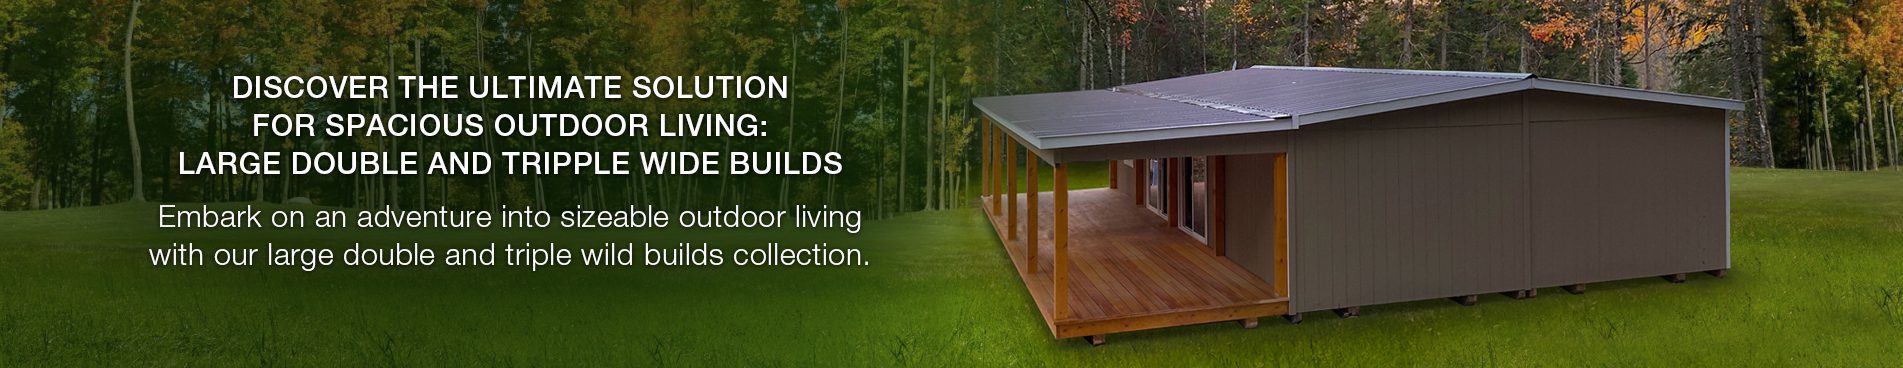 Discover the Ultimate Solution for Spacious Outdoor Living: Large Double and Tripple Wide Builds